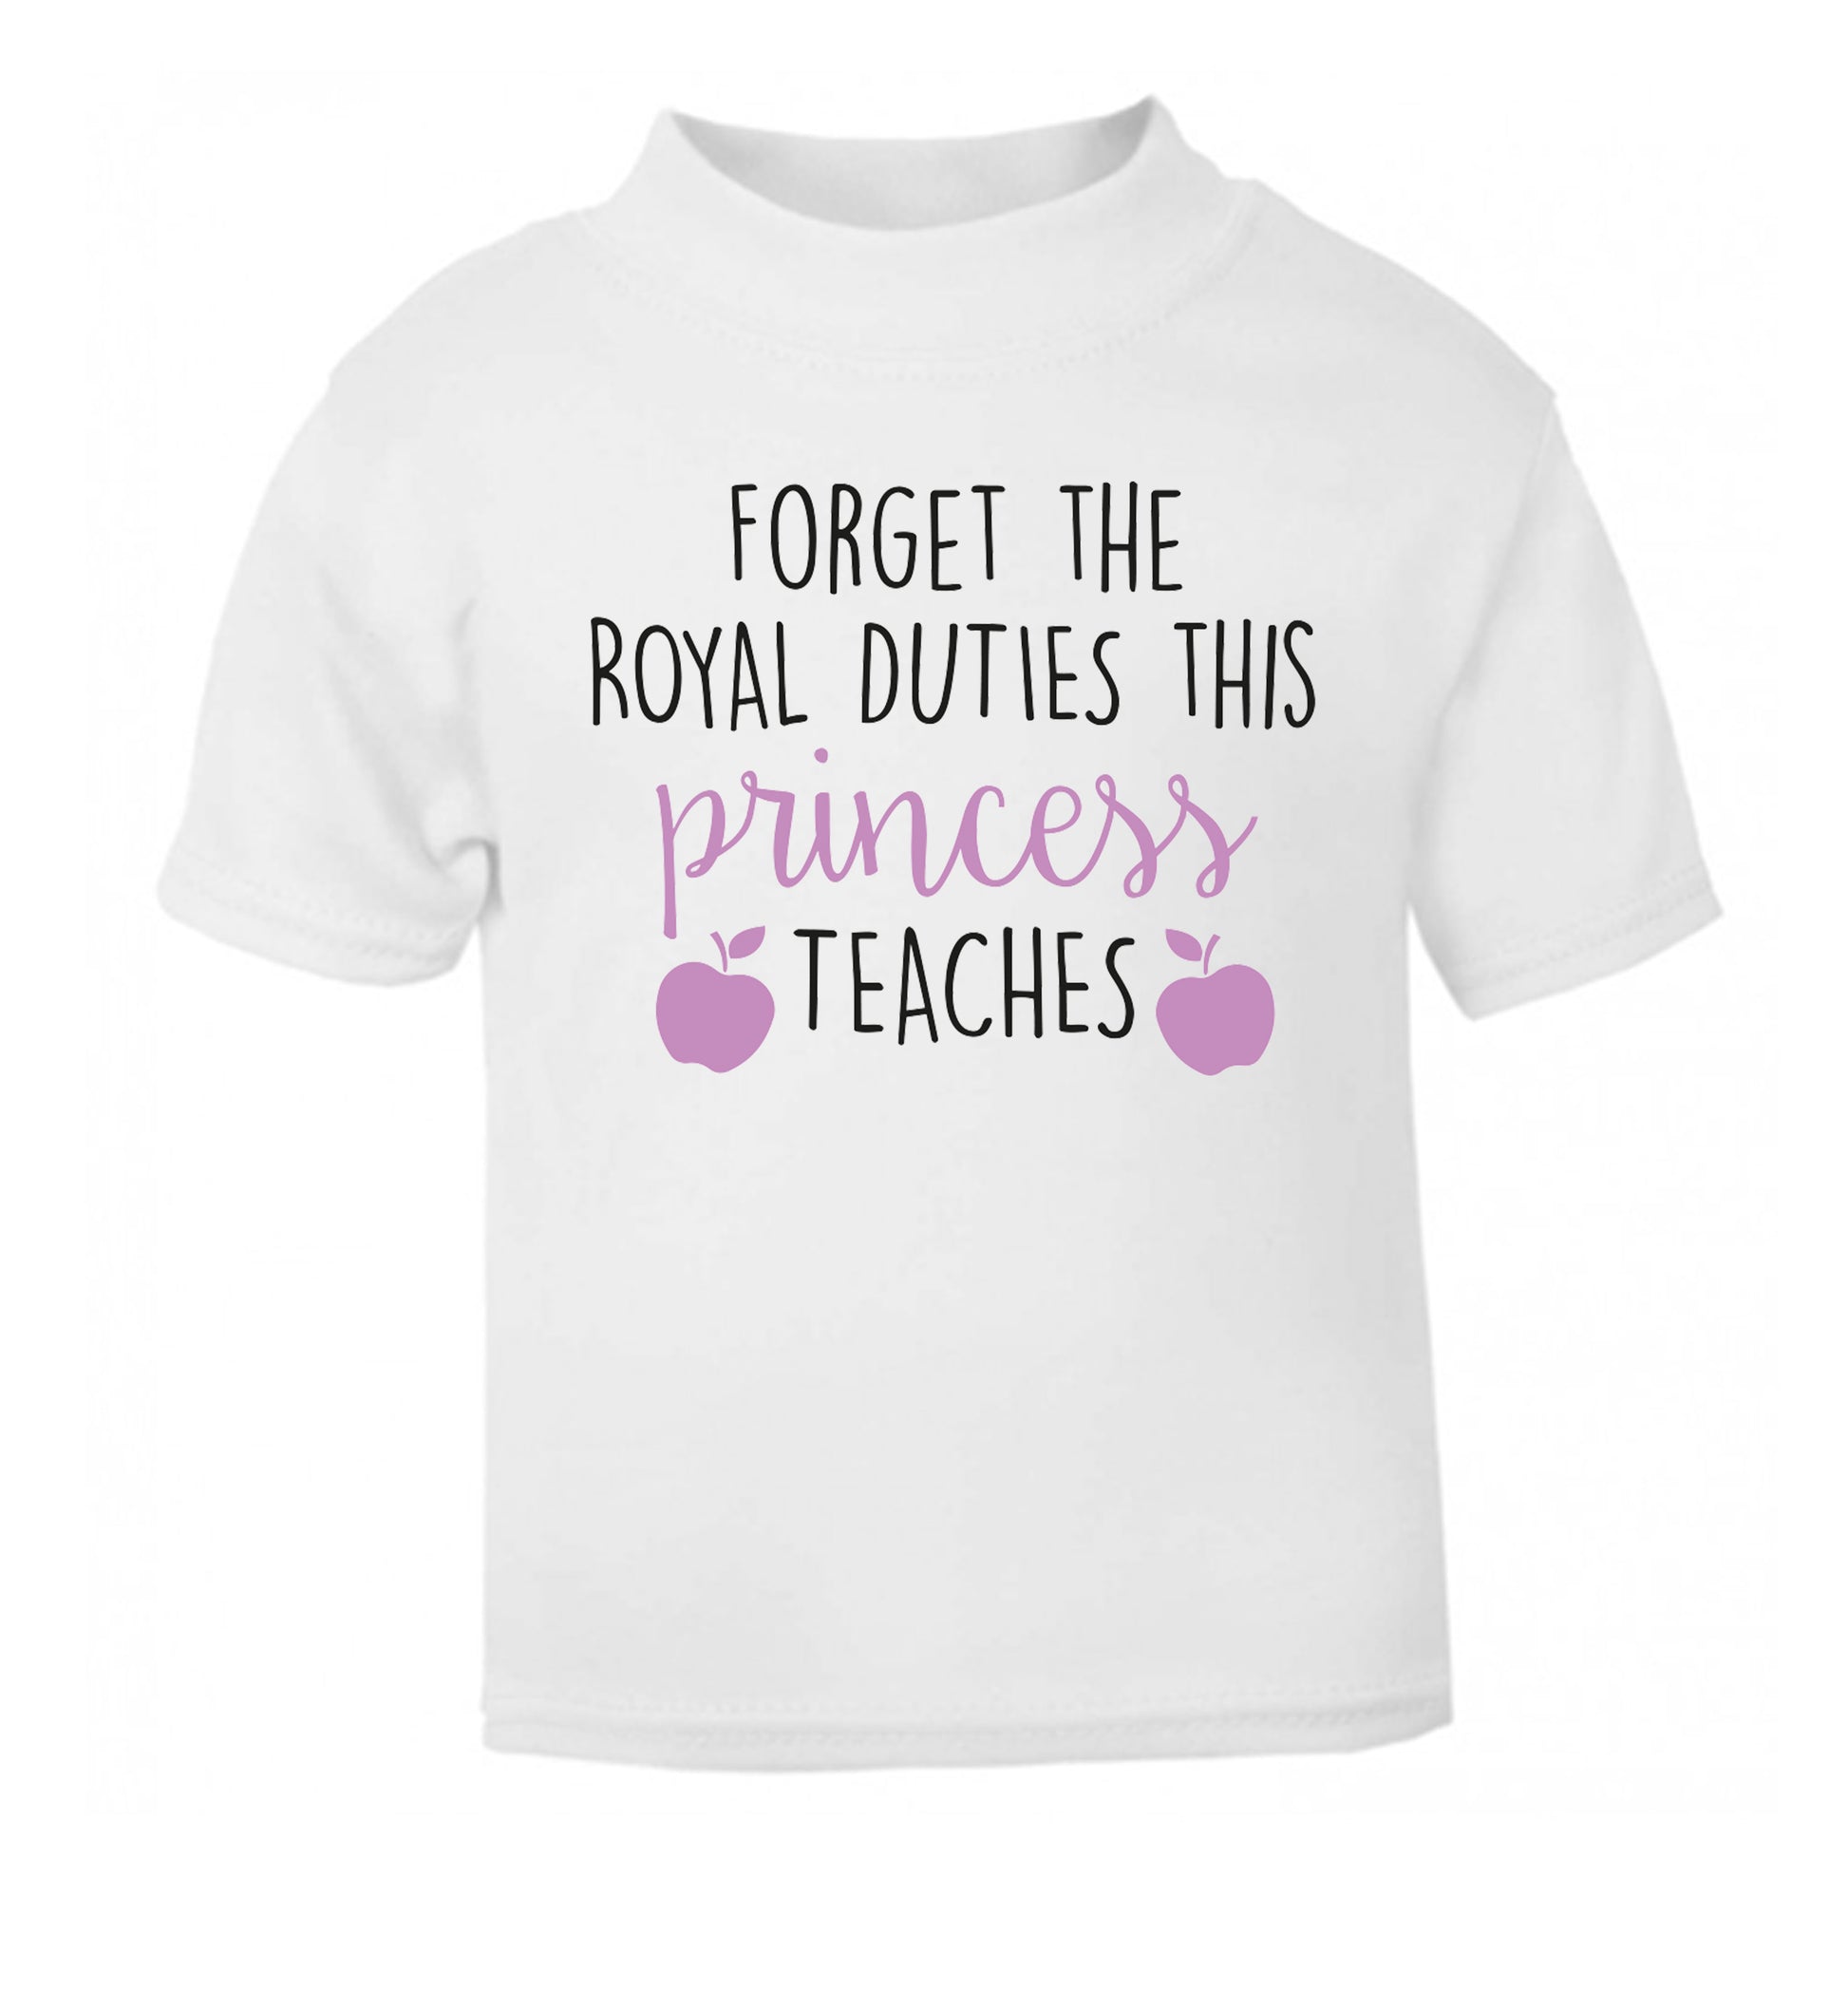 Forget the royal duties this princess teaches white Baby Toddler Tshirt 2 Years